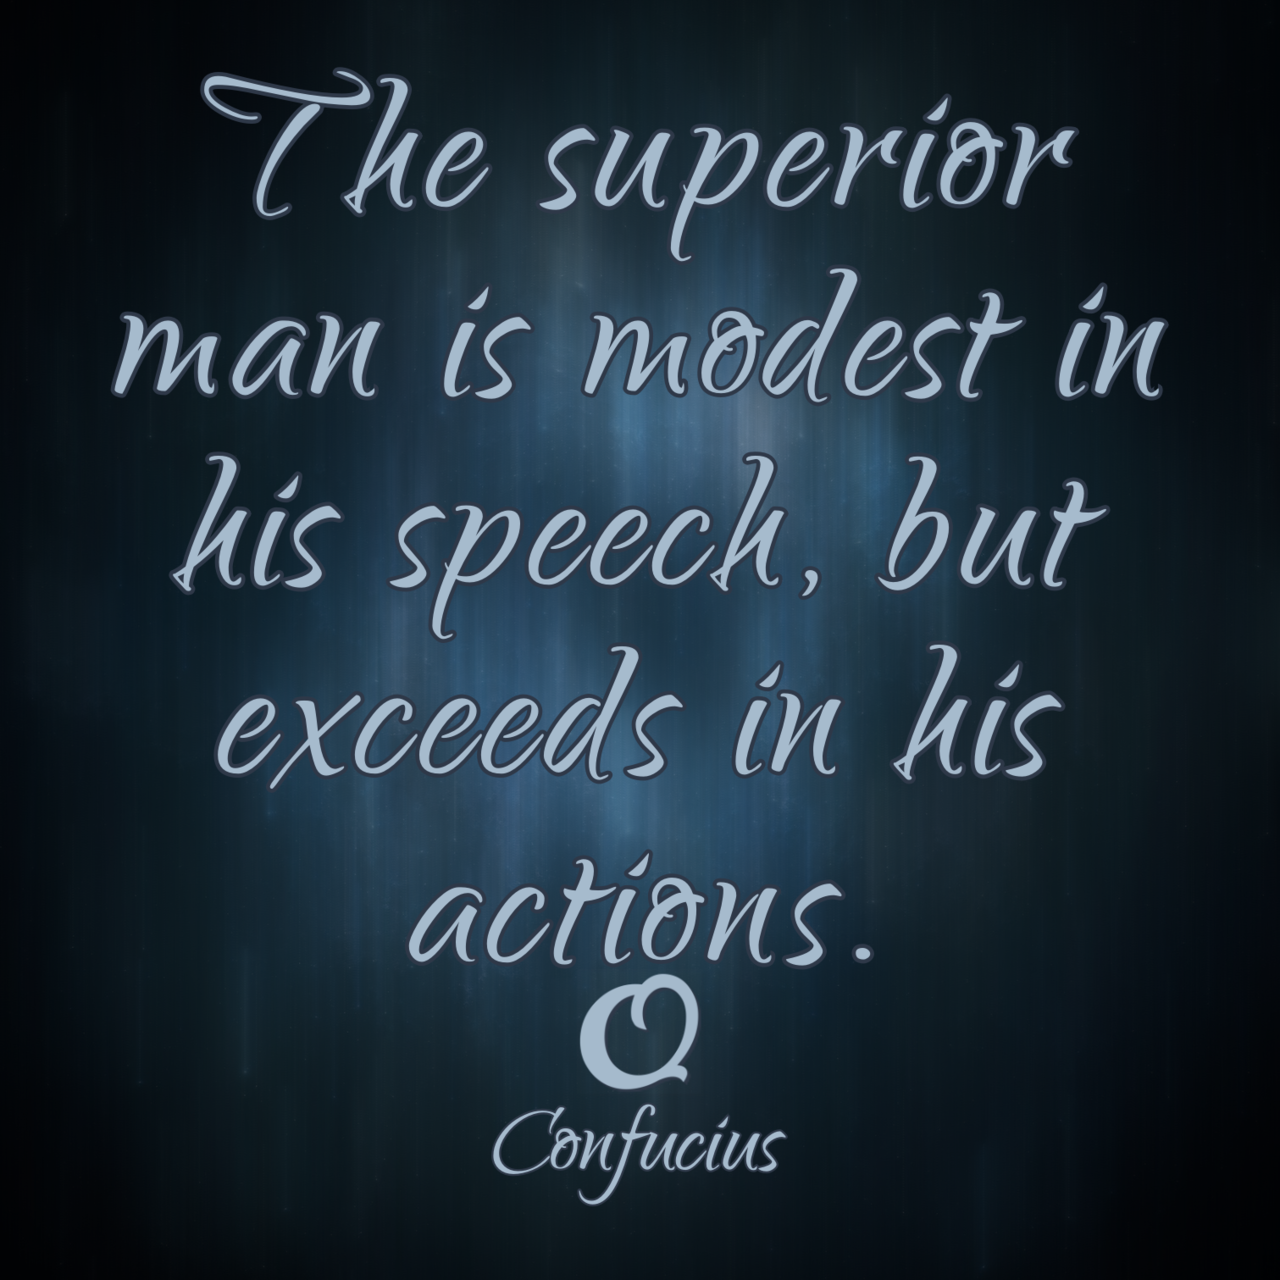 Confucius “The superior man is modest in his speech, but exceeds in his actions.”